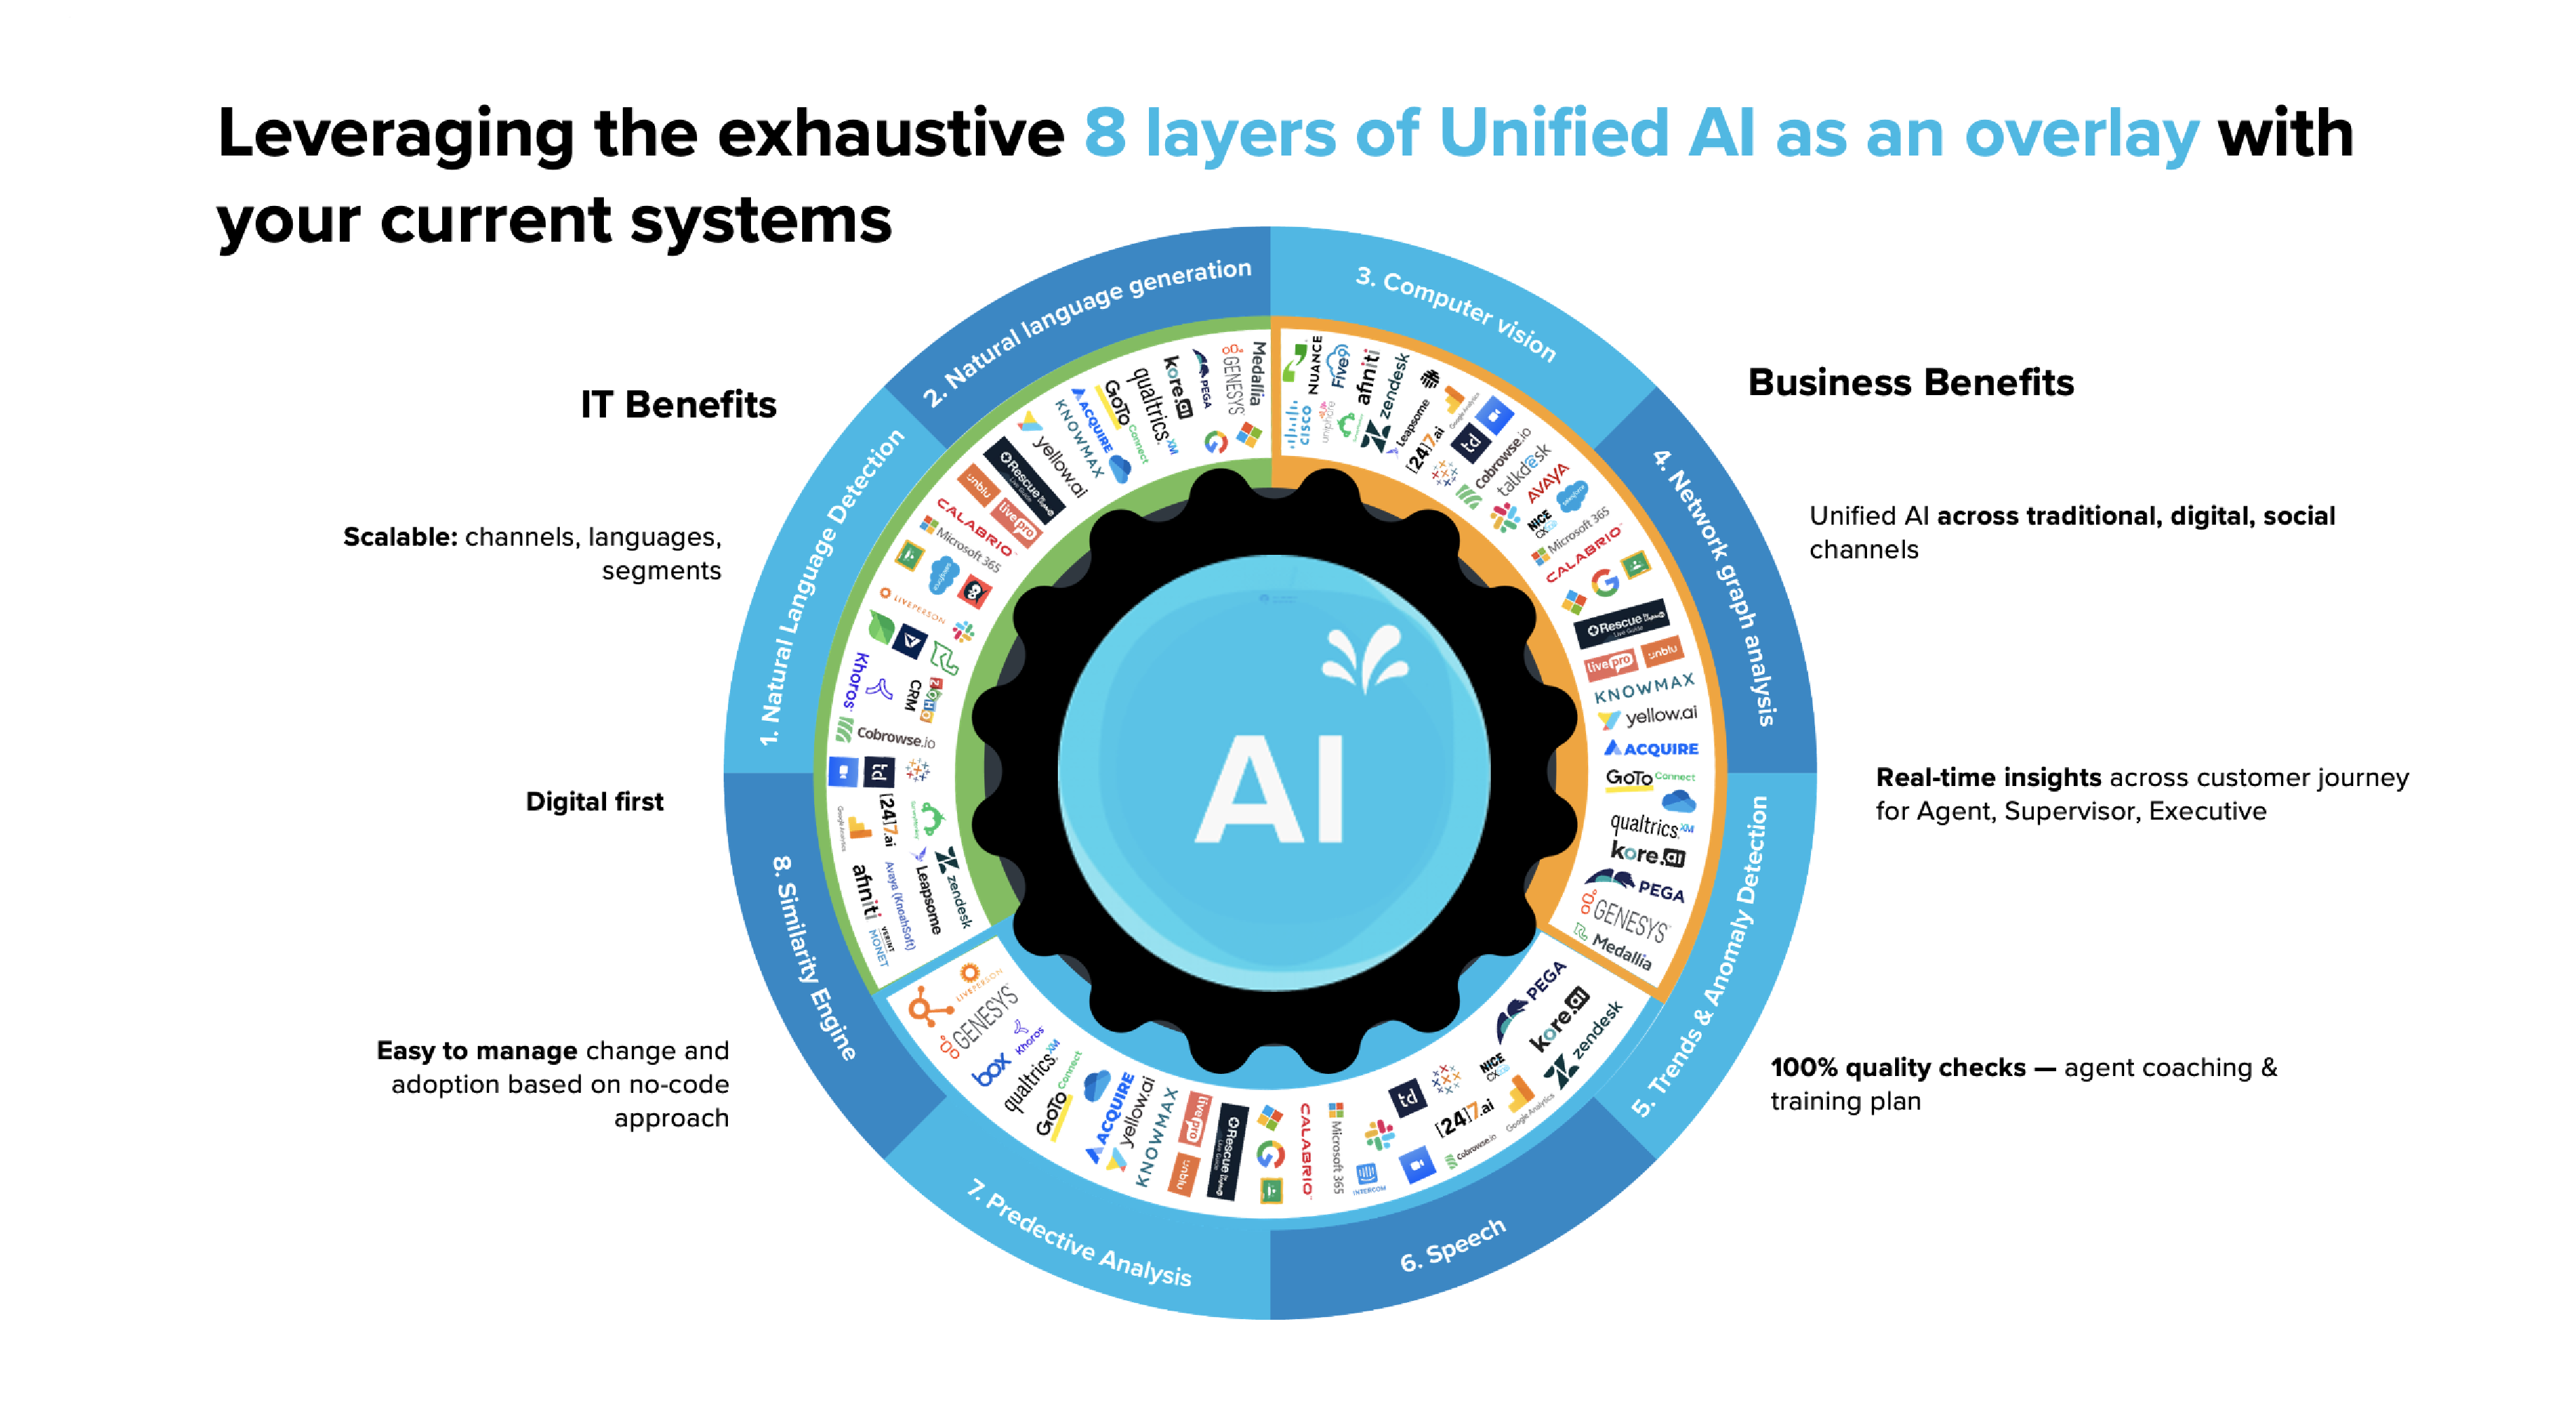 8 layers of Unified AI